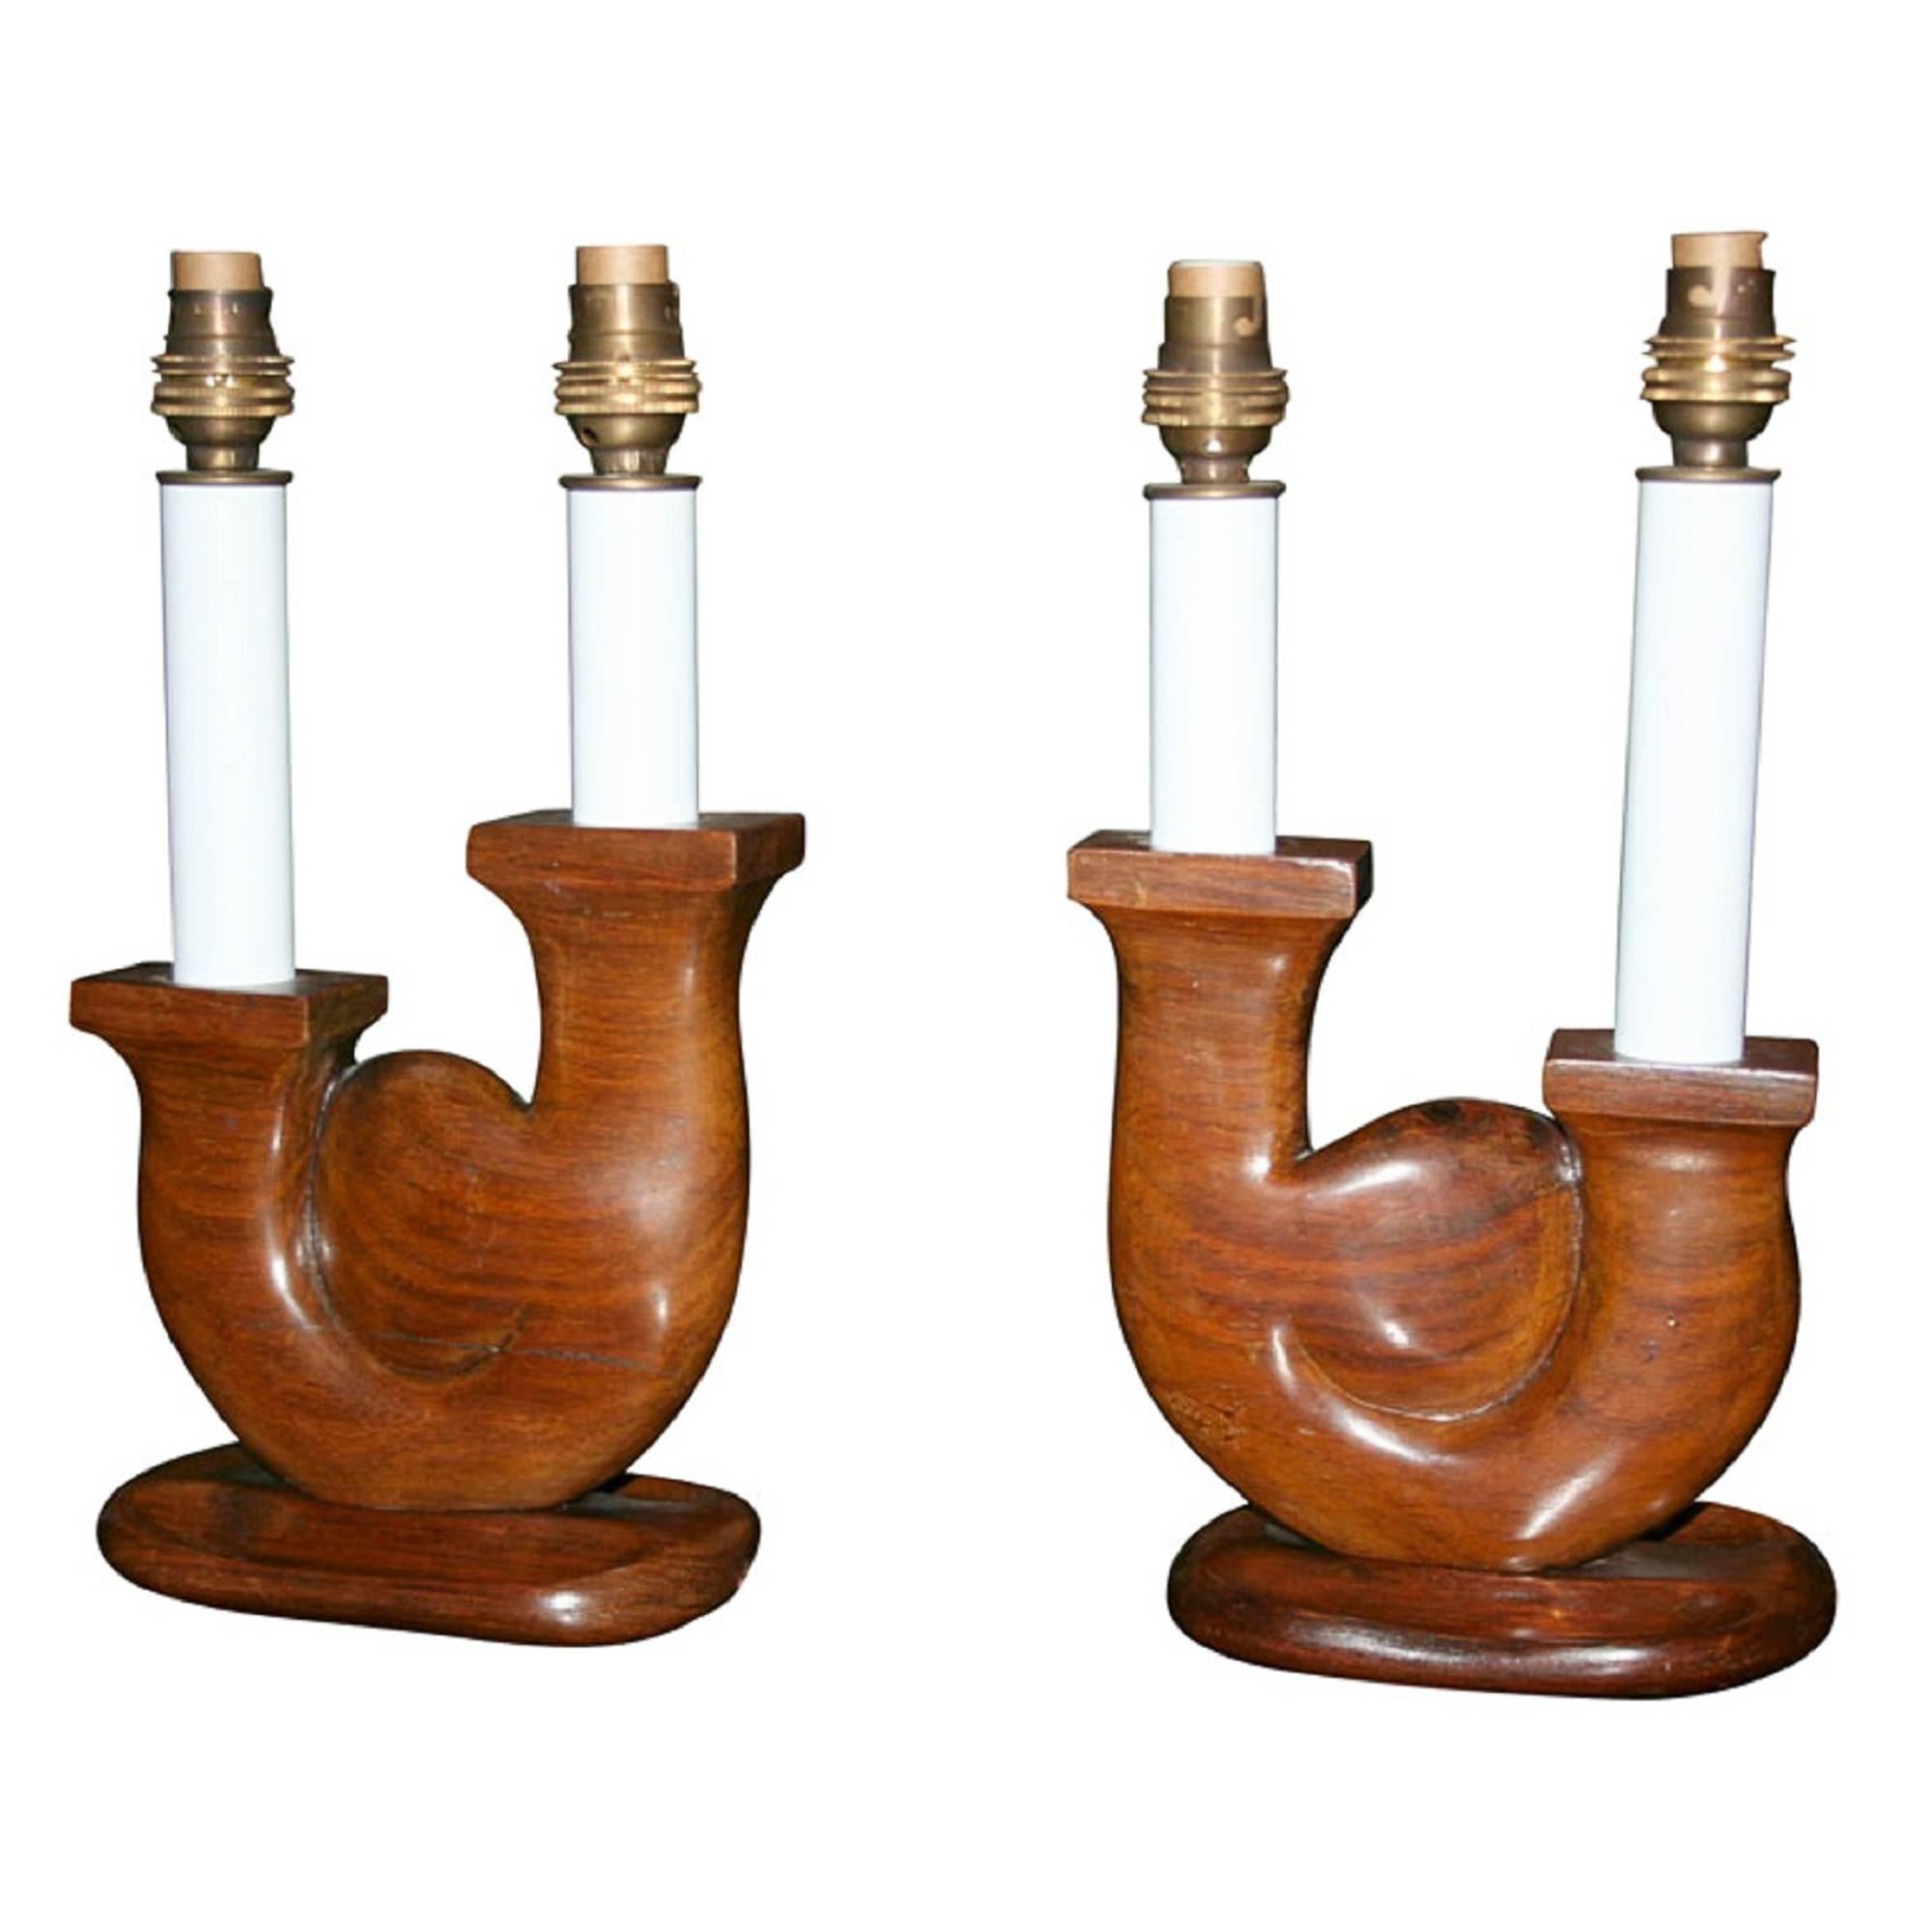 Pair of Palissander Two-Arm Table Lamps by Prodhon, French, 1940s For Sale